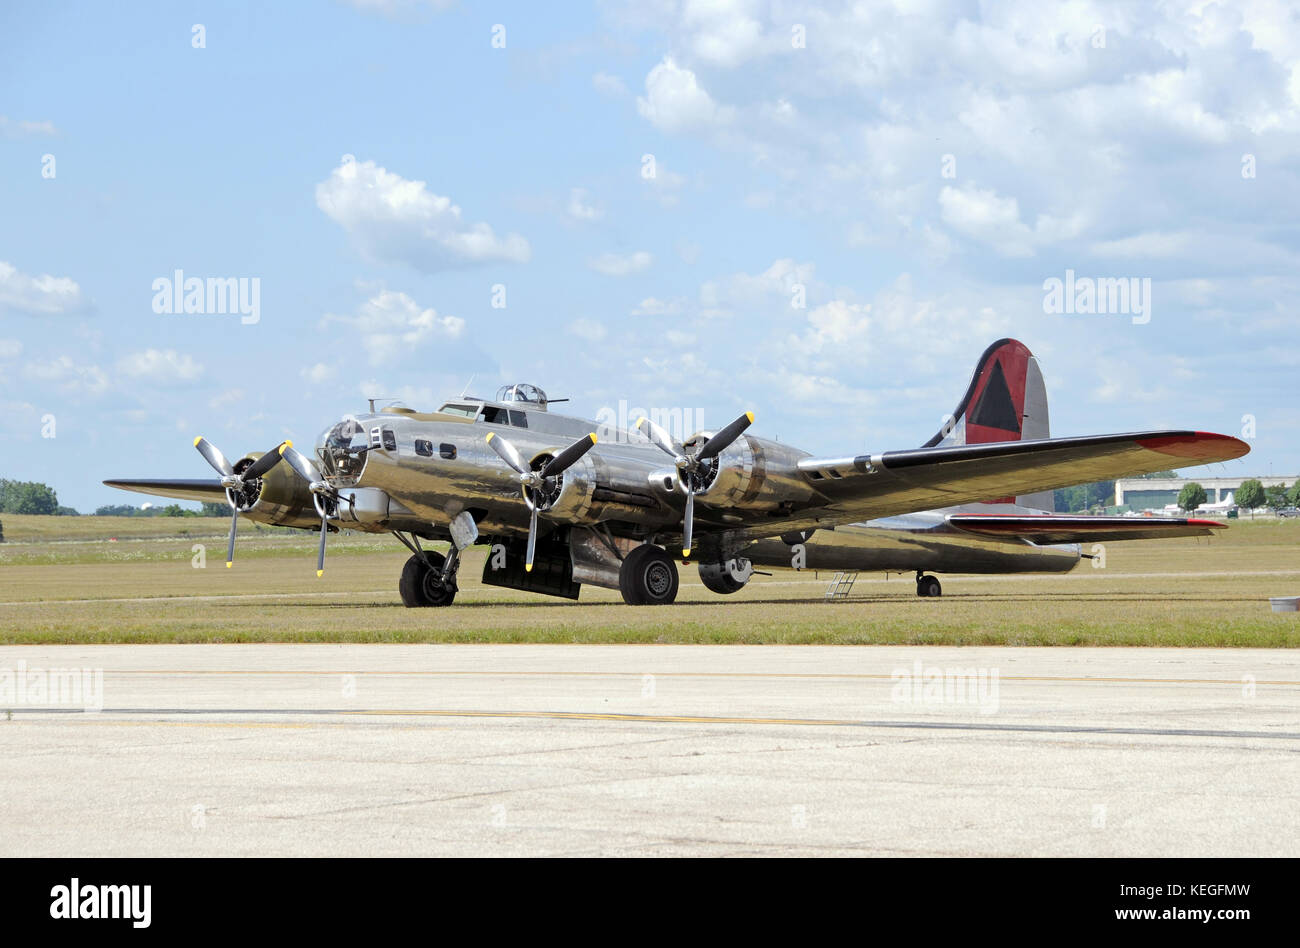 Legendary American B-17 Flying Fortress bomber used in World War II Stock Photo